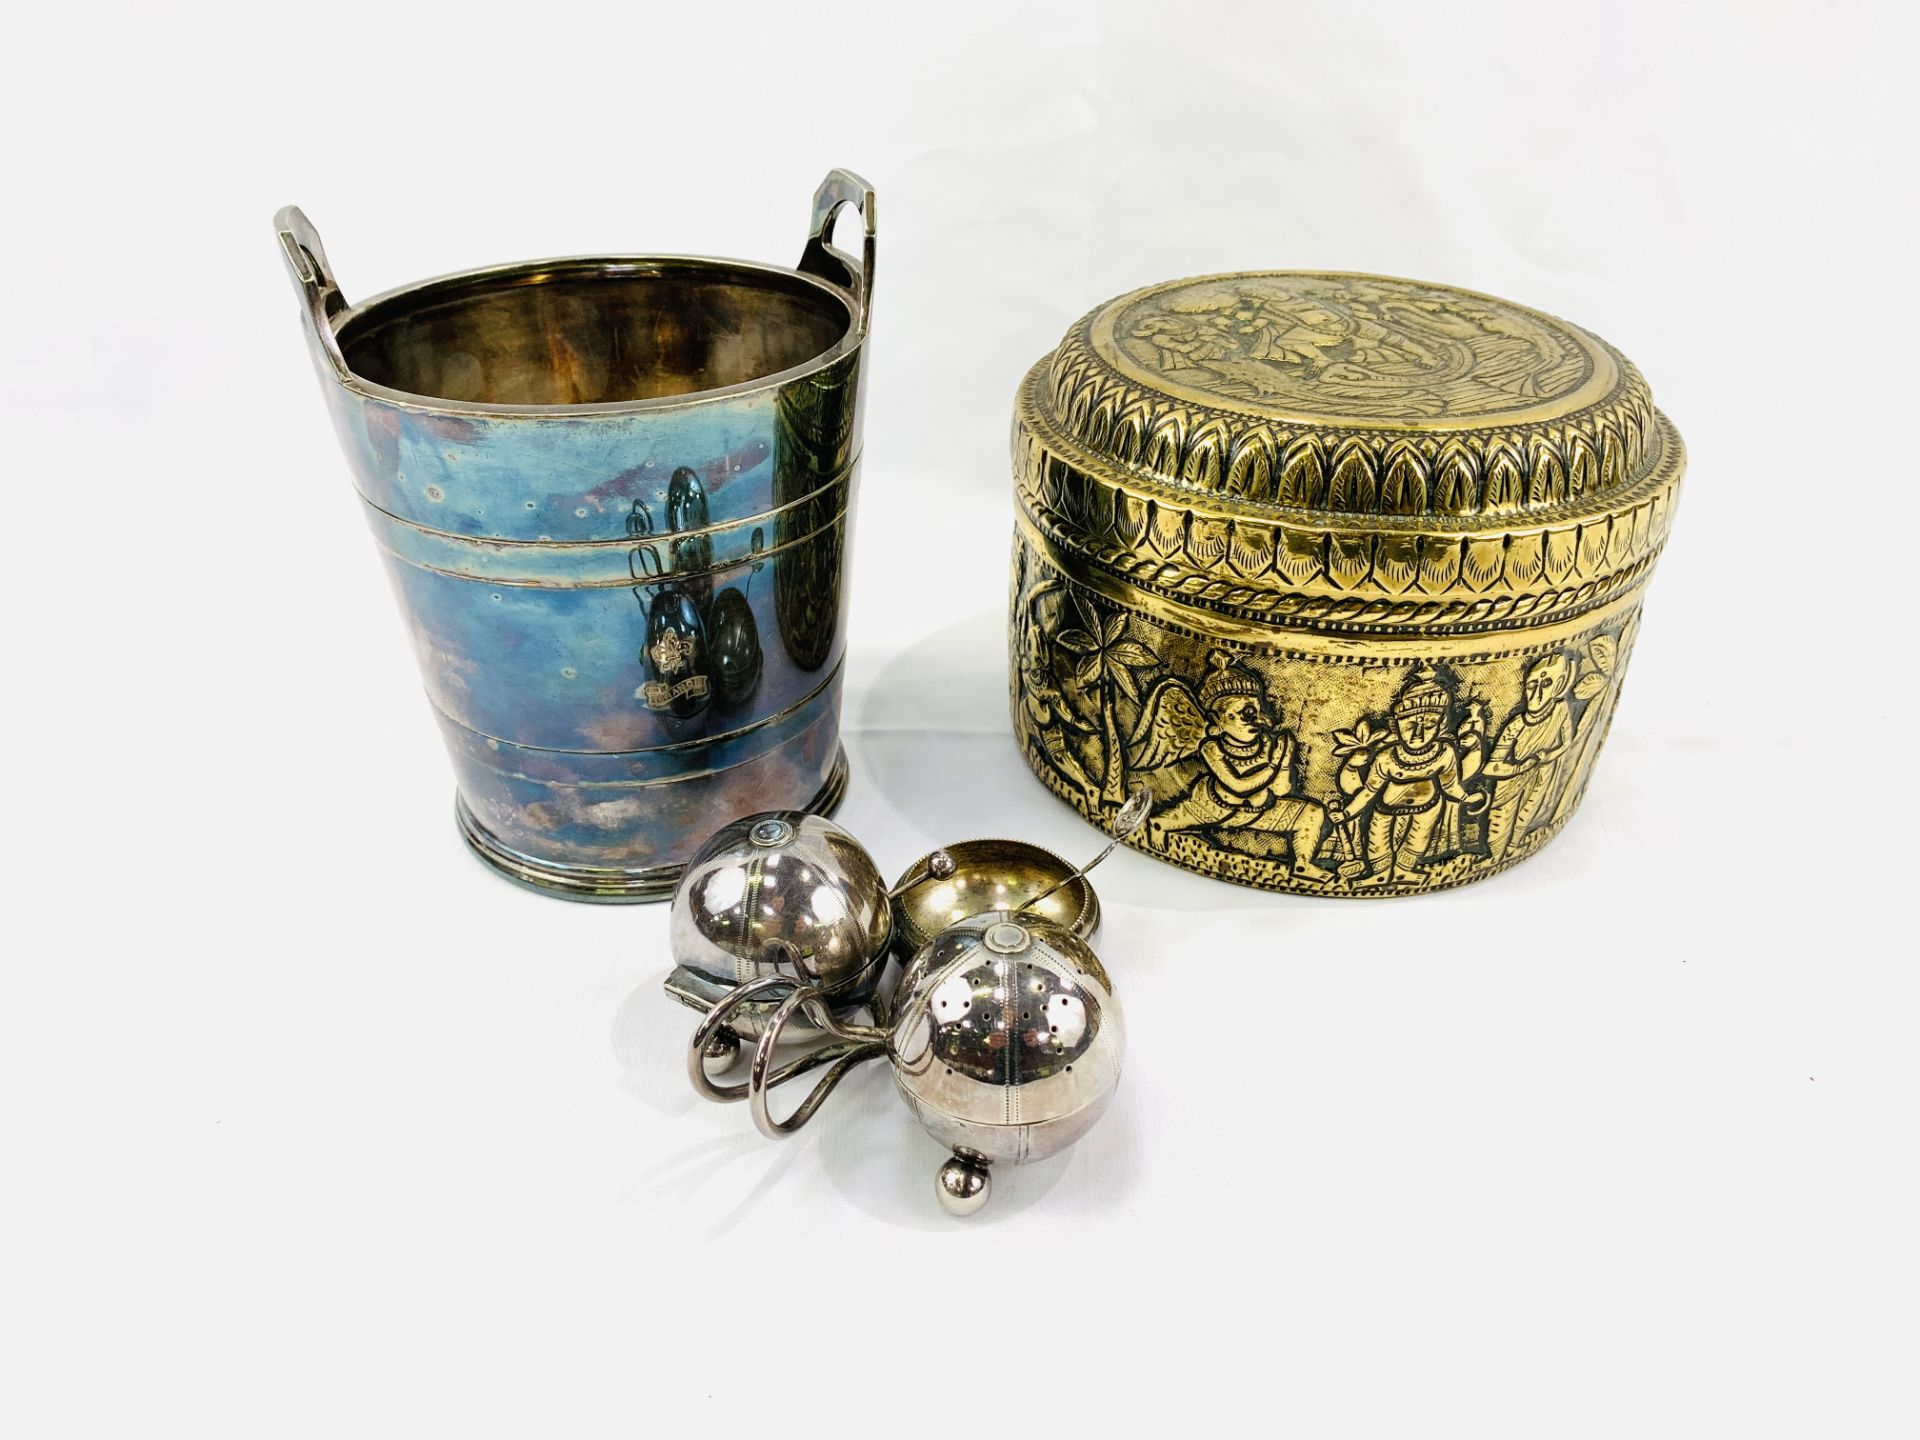 Silver plate wine cooler; cruet set in the shape of a clover leaf by Elkington; and a brass pot